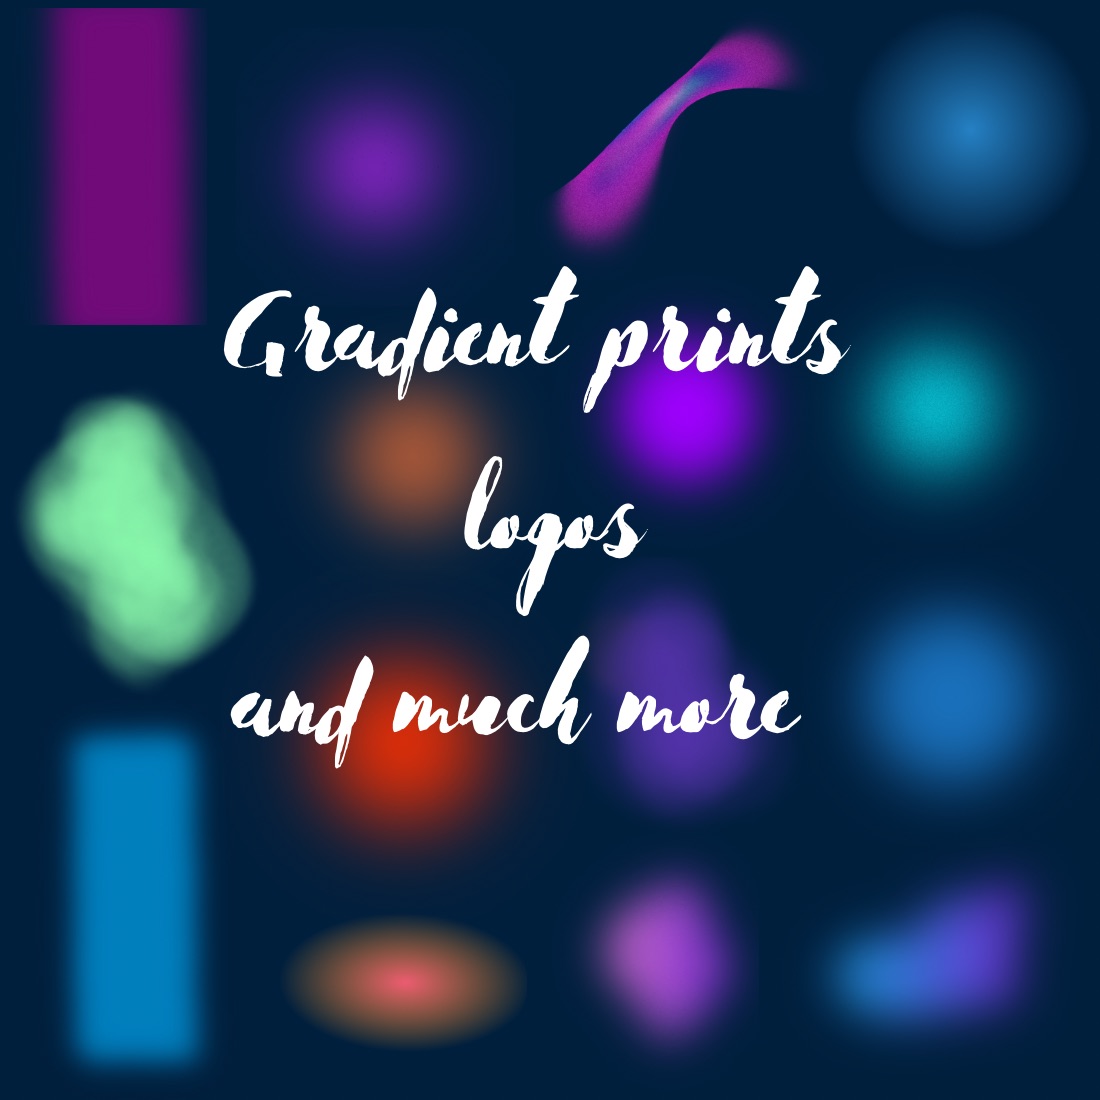 Gradient logos patterns preview image.